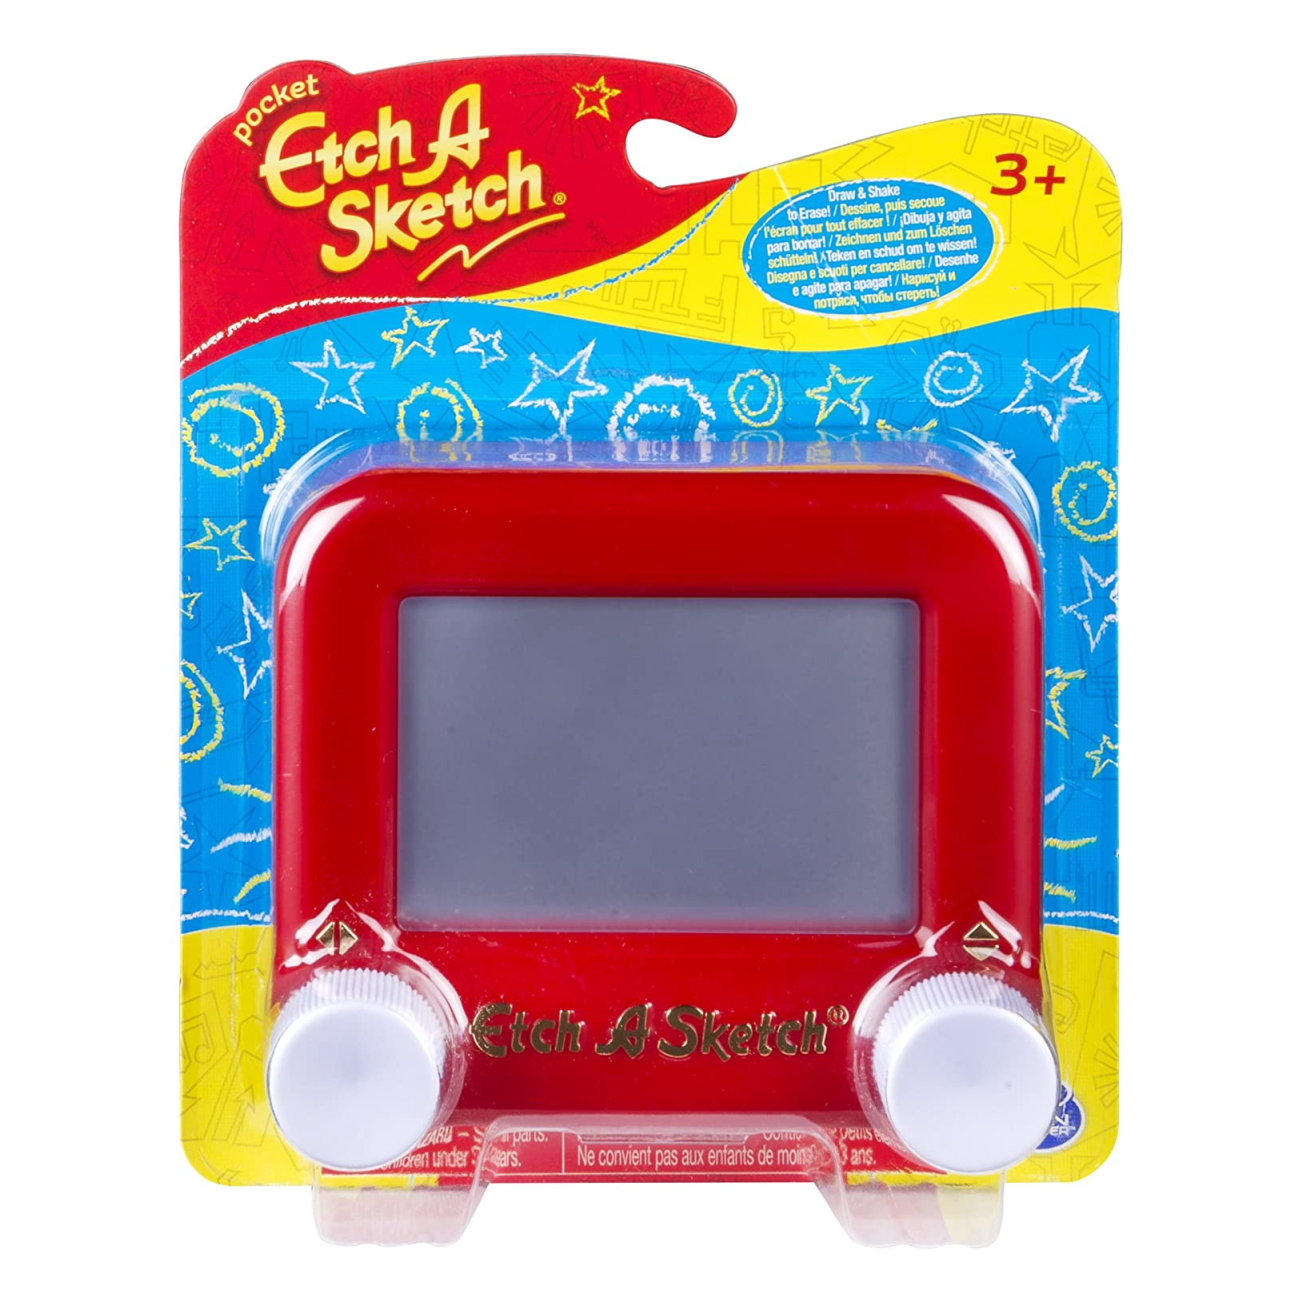 Vintage Etch-A-Sketch and other old-school toys from Ohio Arts